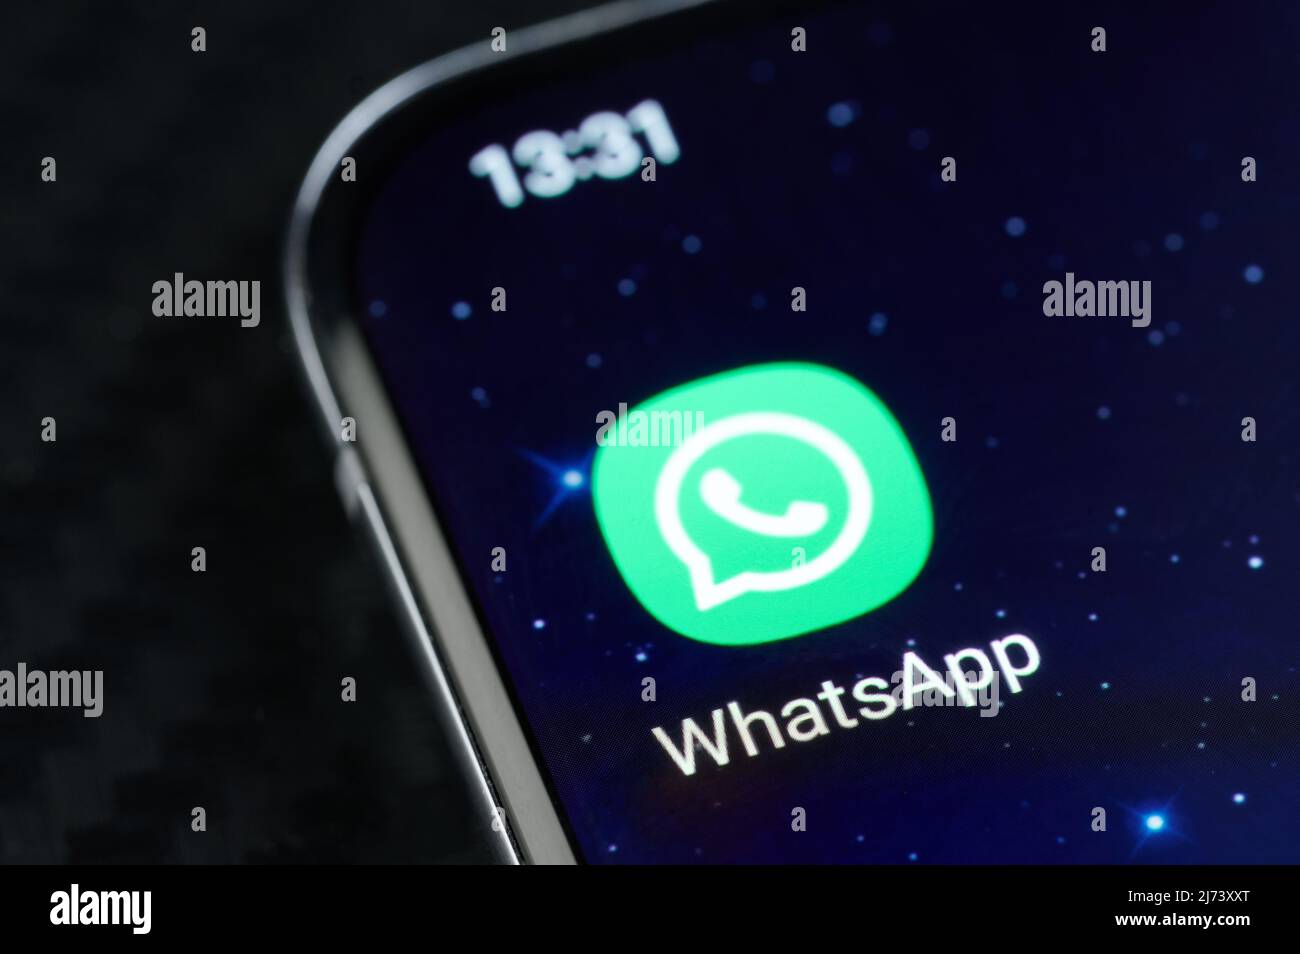 New york, USA - May 5, 2022: Whatsapp messenger mobile app on smartphone screen close up view Stock Photo